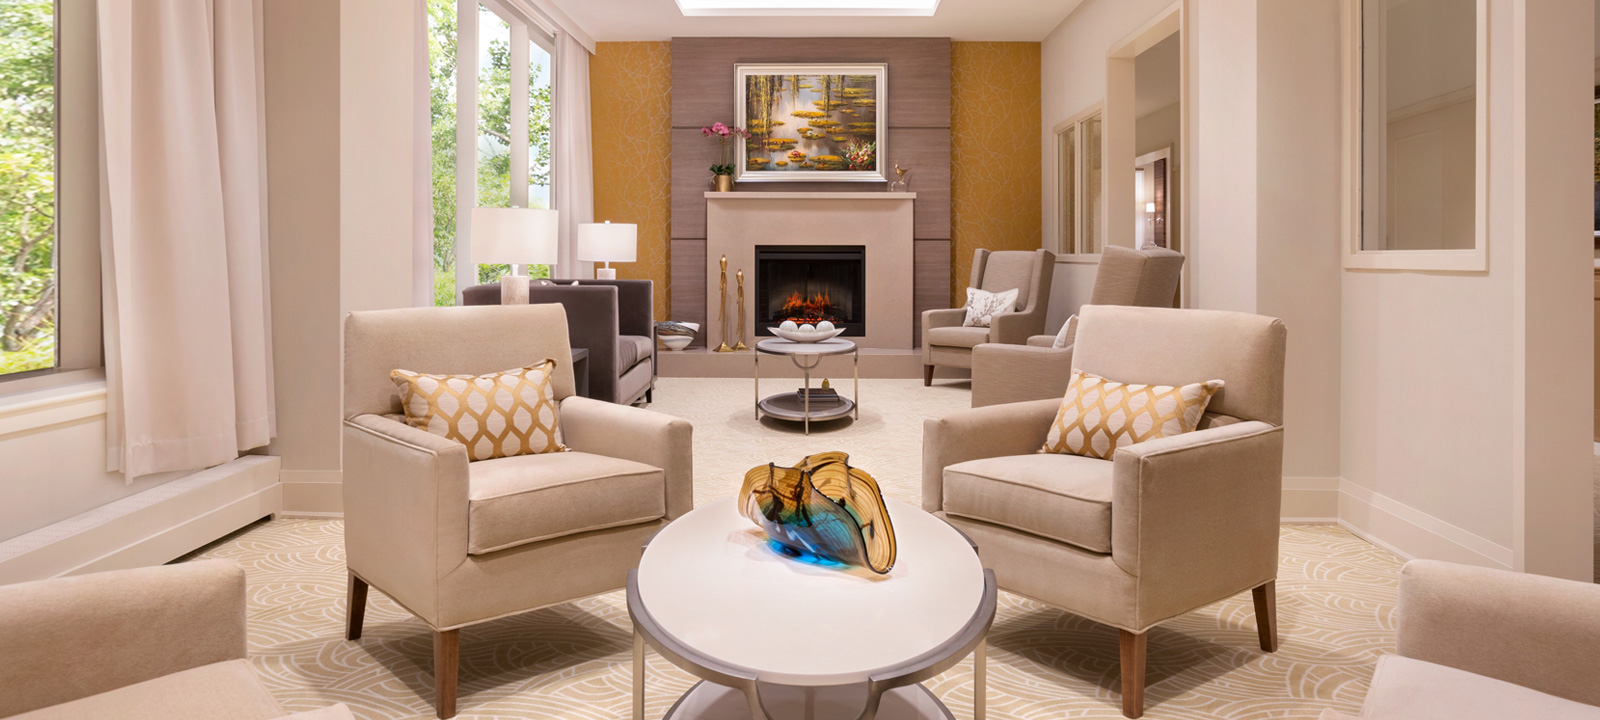 The renovated Swan Lake lounge includes luxurious seating with a fireplace at the heart of the room.